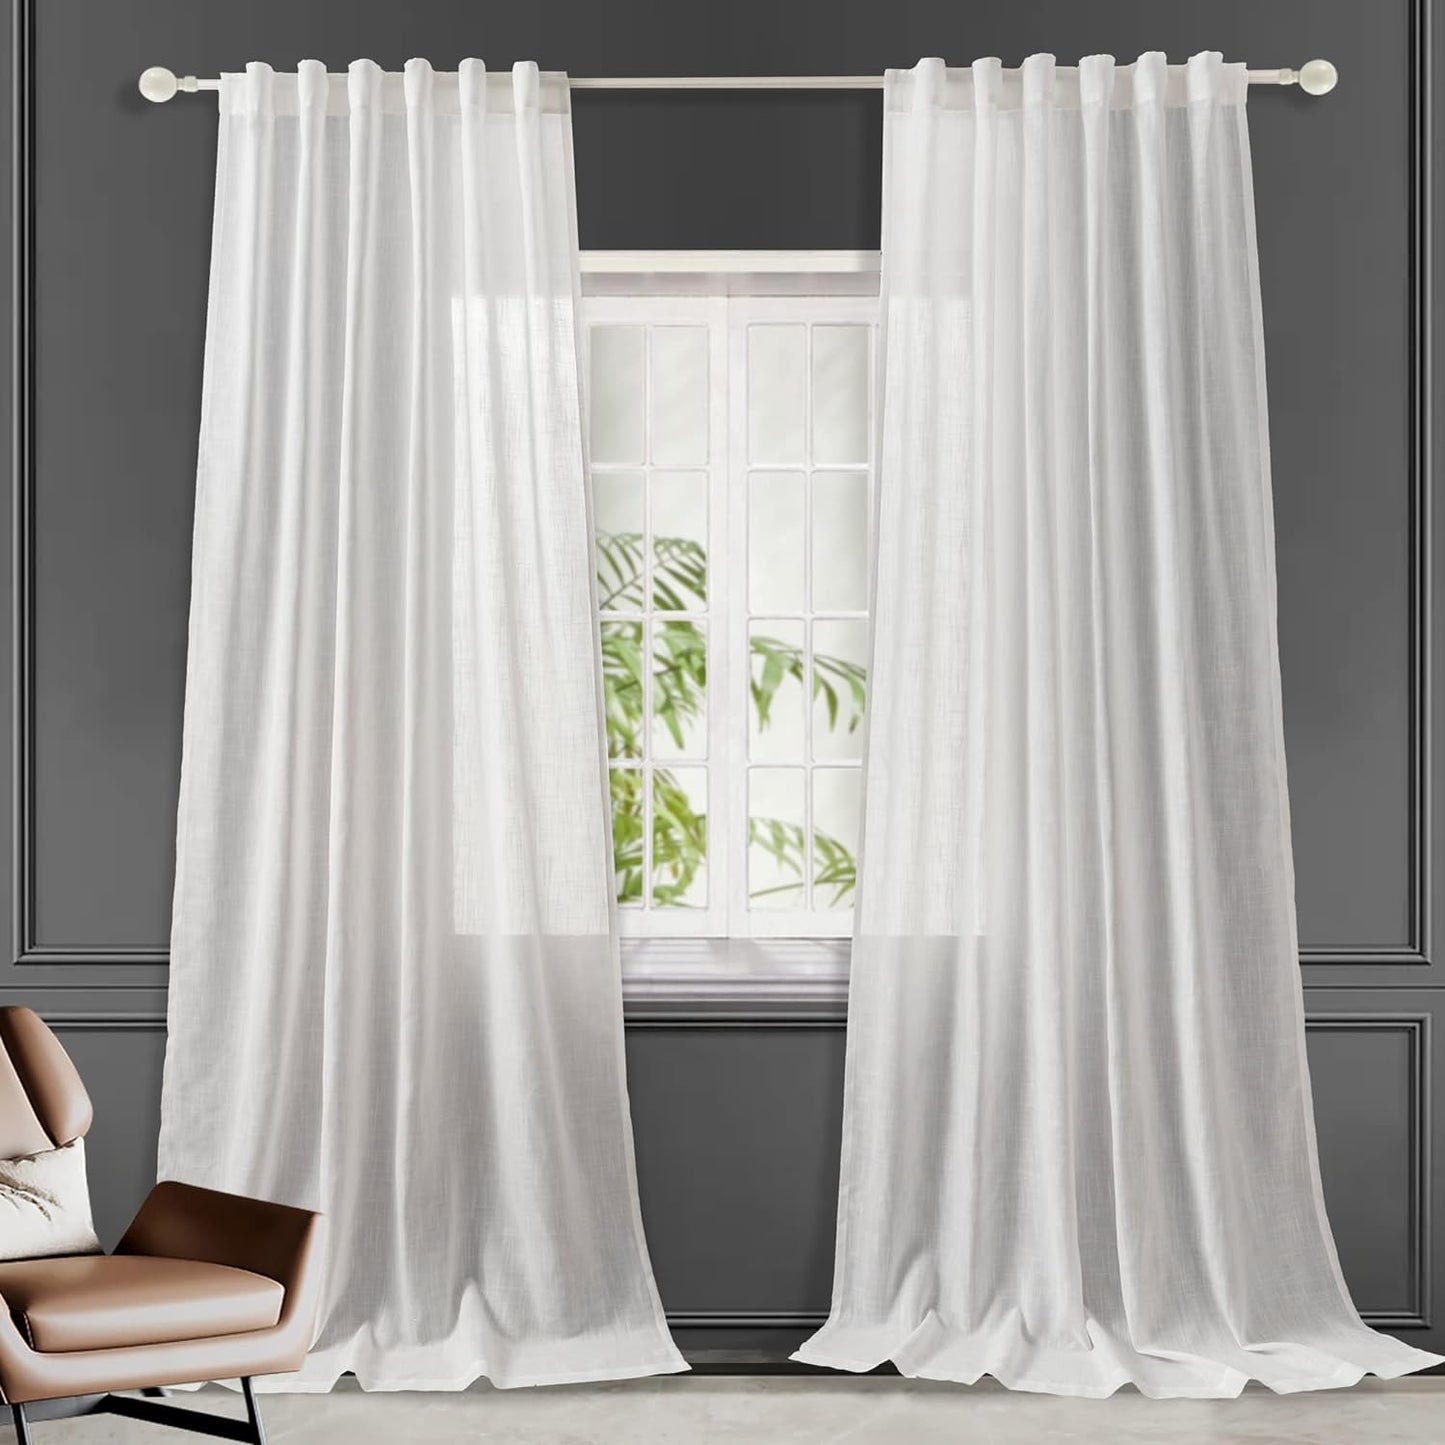 Pure White Linen Curtains 84 Inch Long Back Tab Loop Pocket Drape Cotton Textured Curtains 2 Panels Set Light Filtering Semi Sheer Linen Curtain for Living Room Bedroom Farmhouse 52X84  Hoydumuia White 52"X84" 